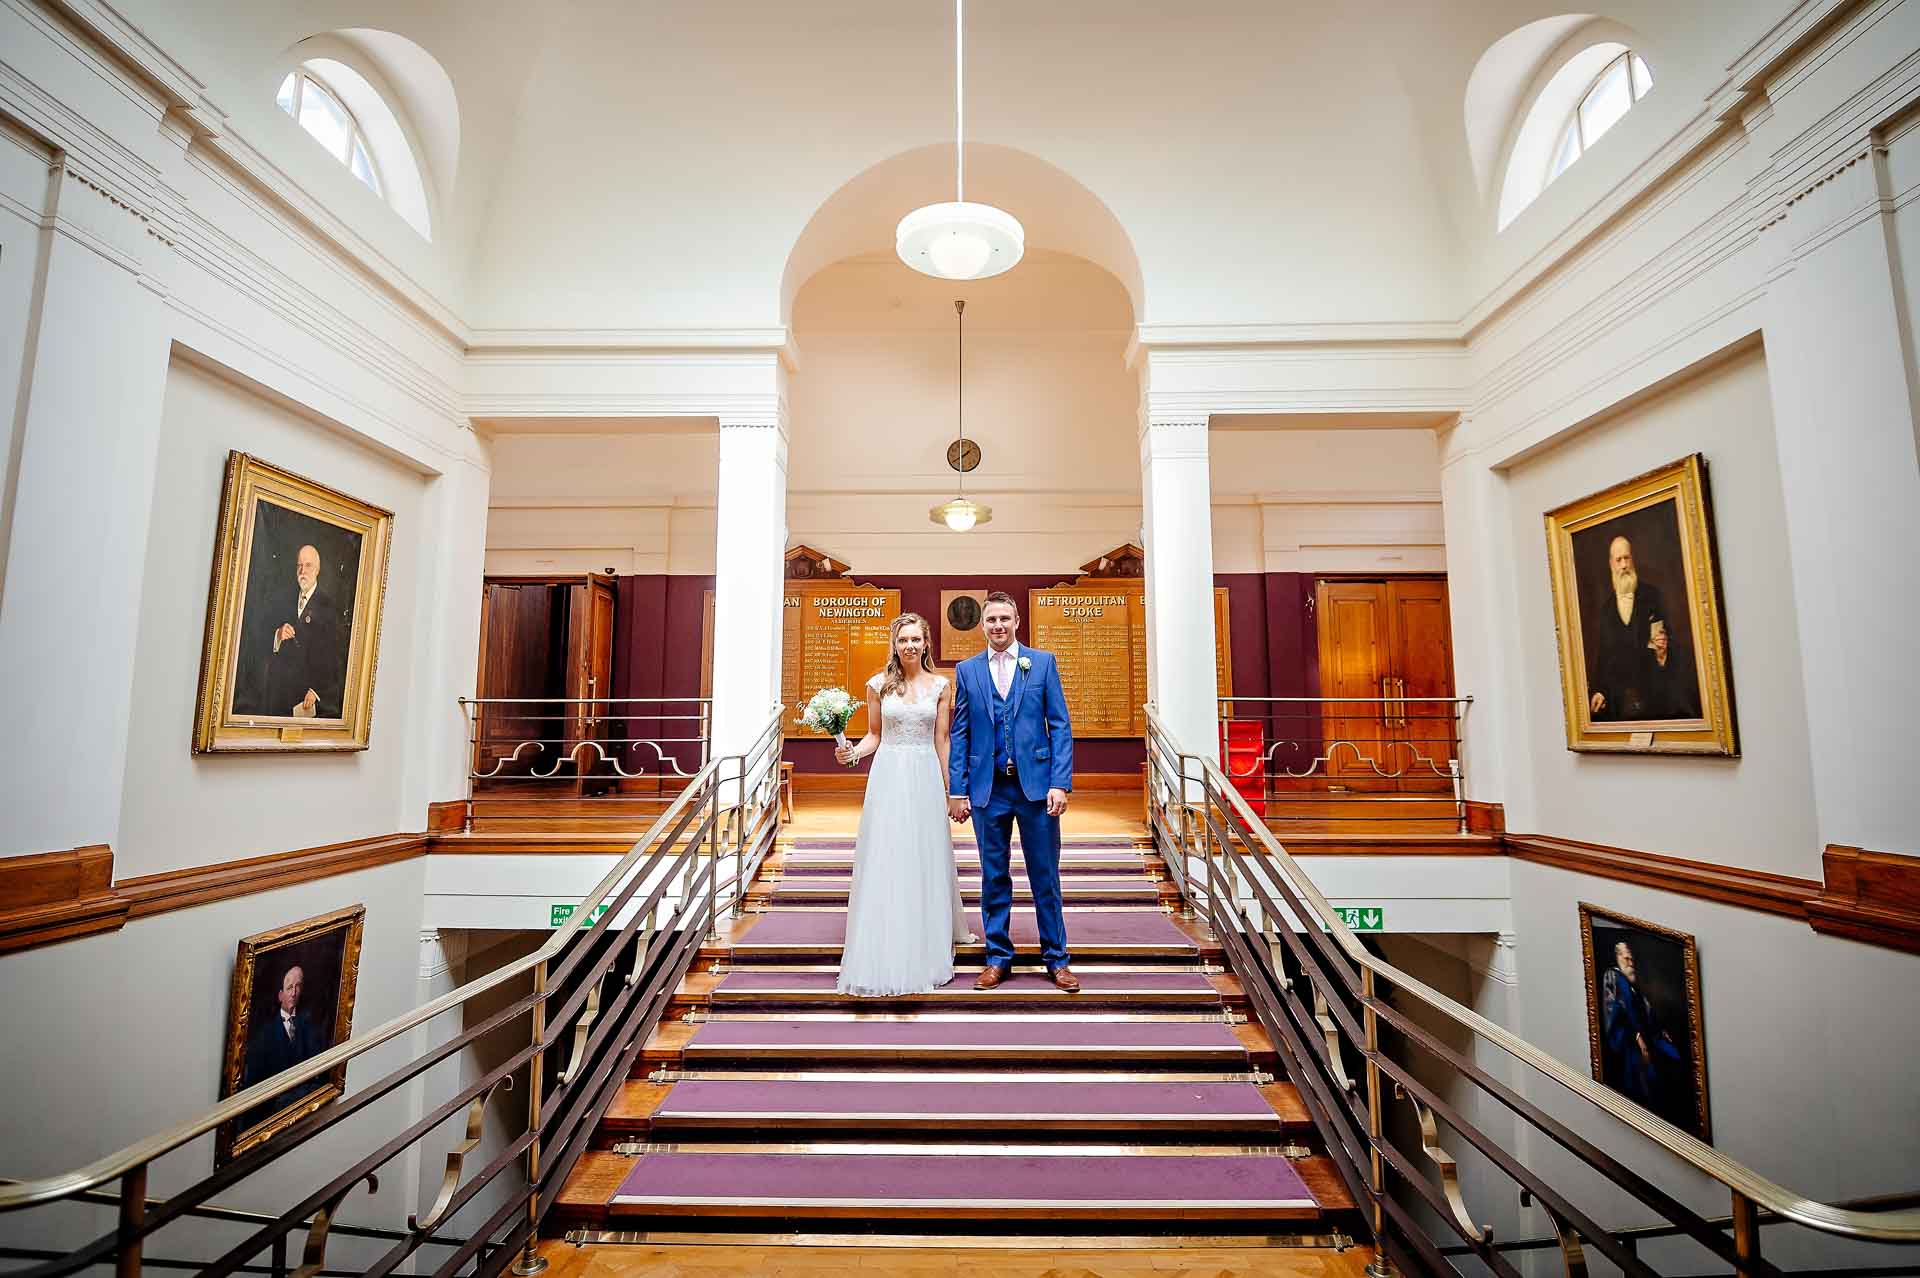 Posed Wedding Couple on Ornate Staircase